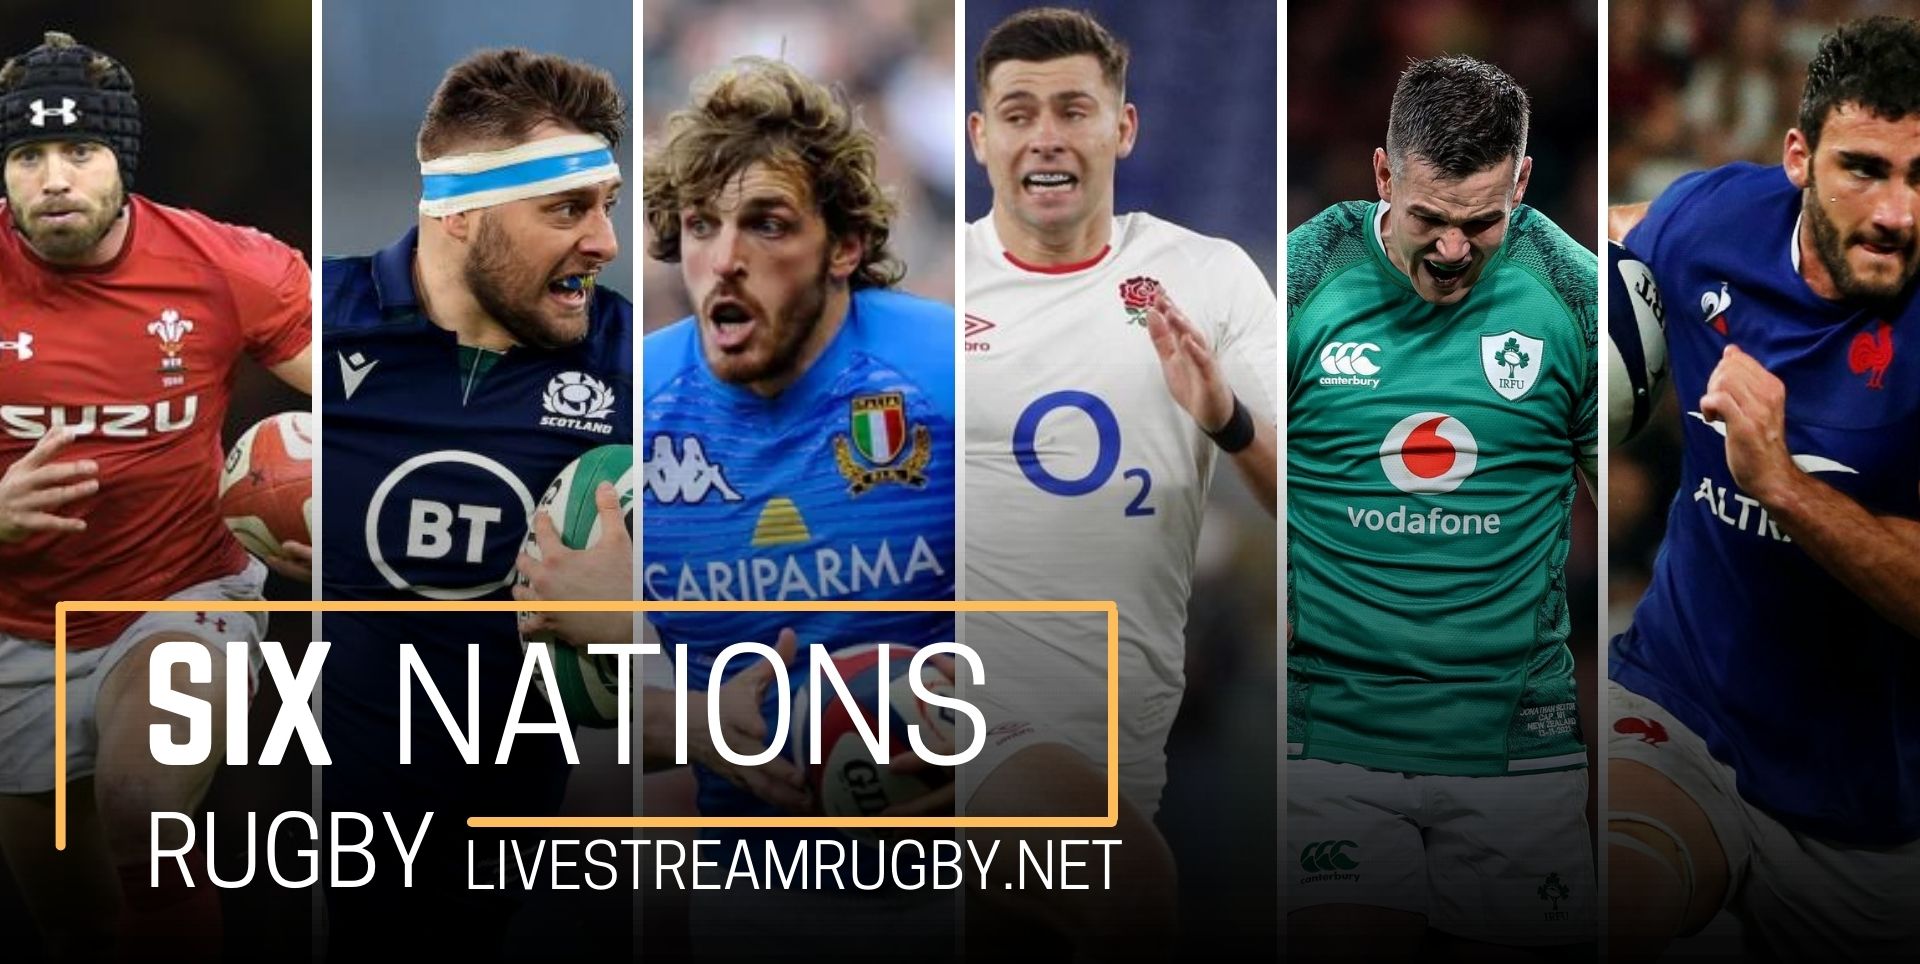 Six Nations Rugby Broadcaster And Streaming